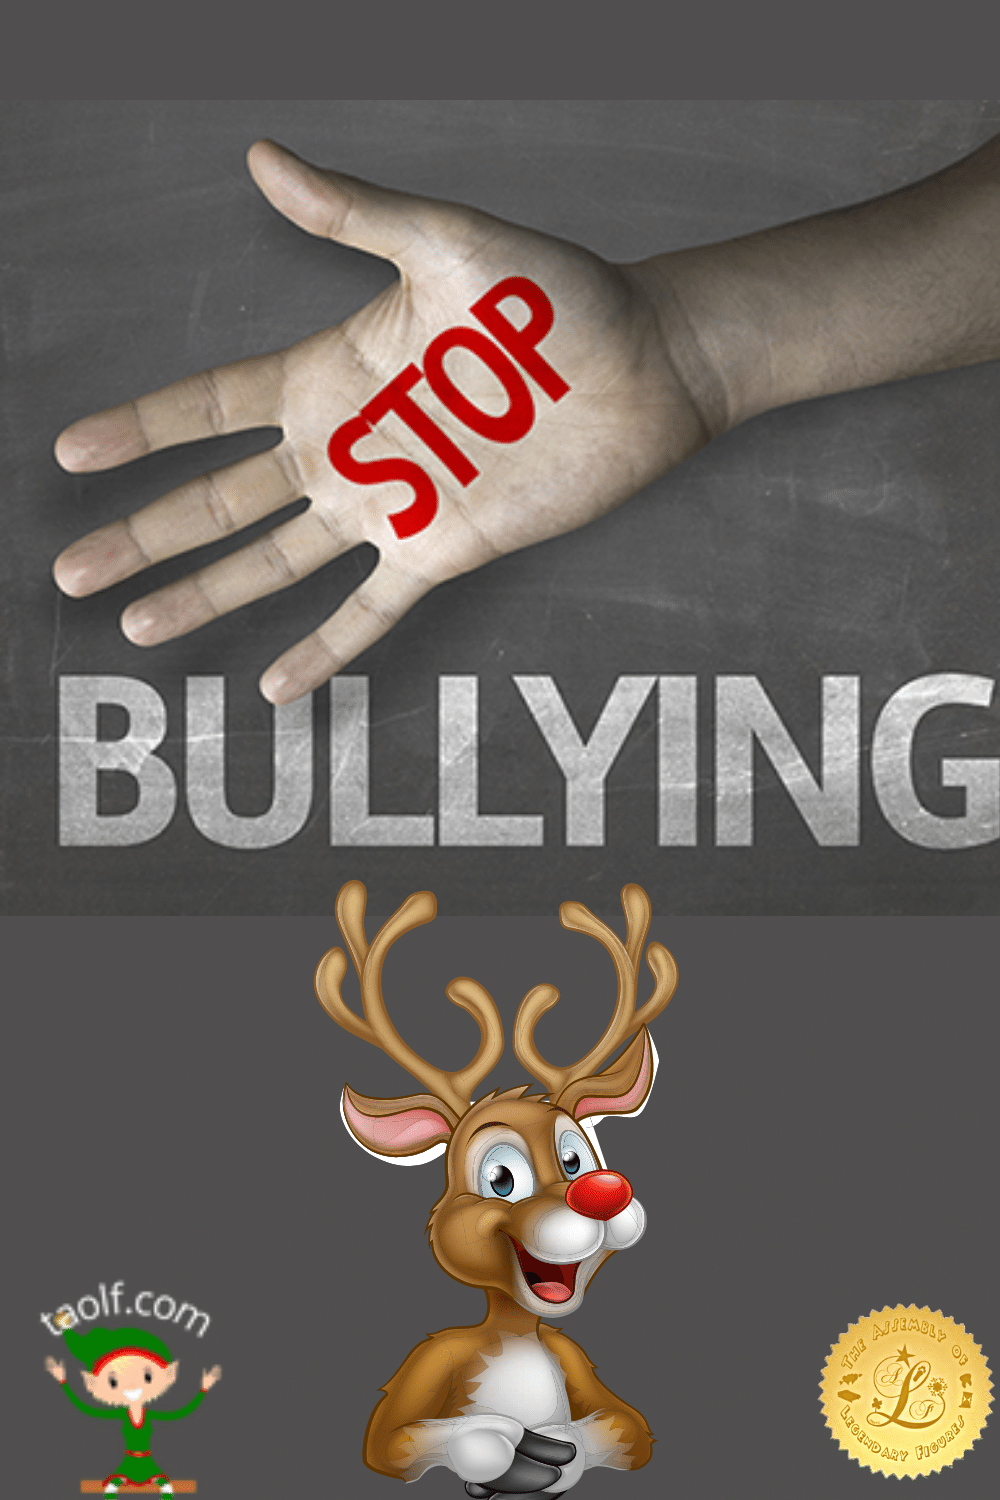 Rudolph Recommends StopBullying.gov as Resource